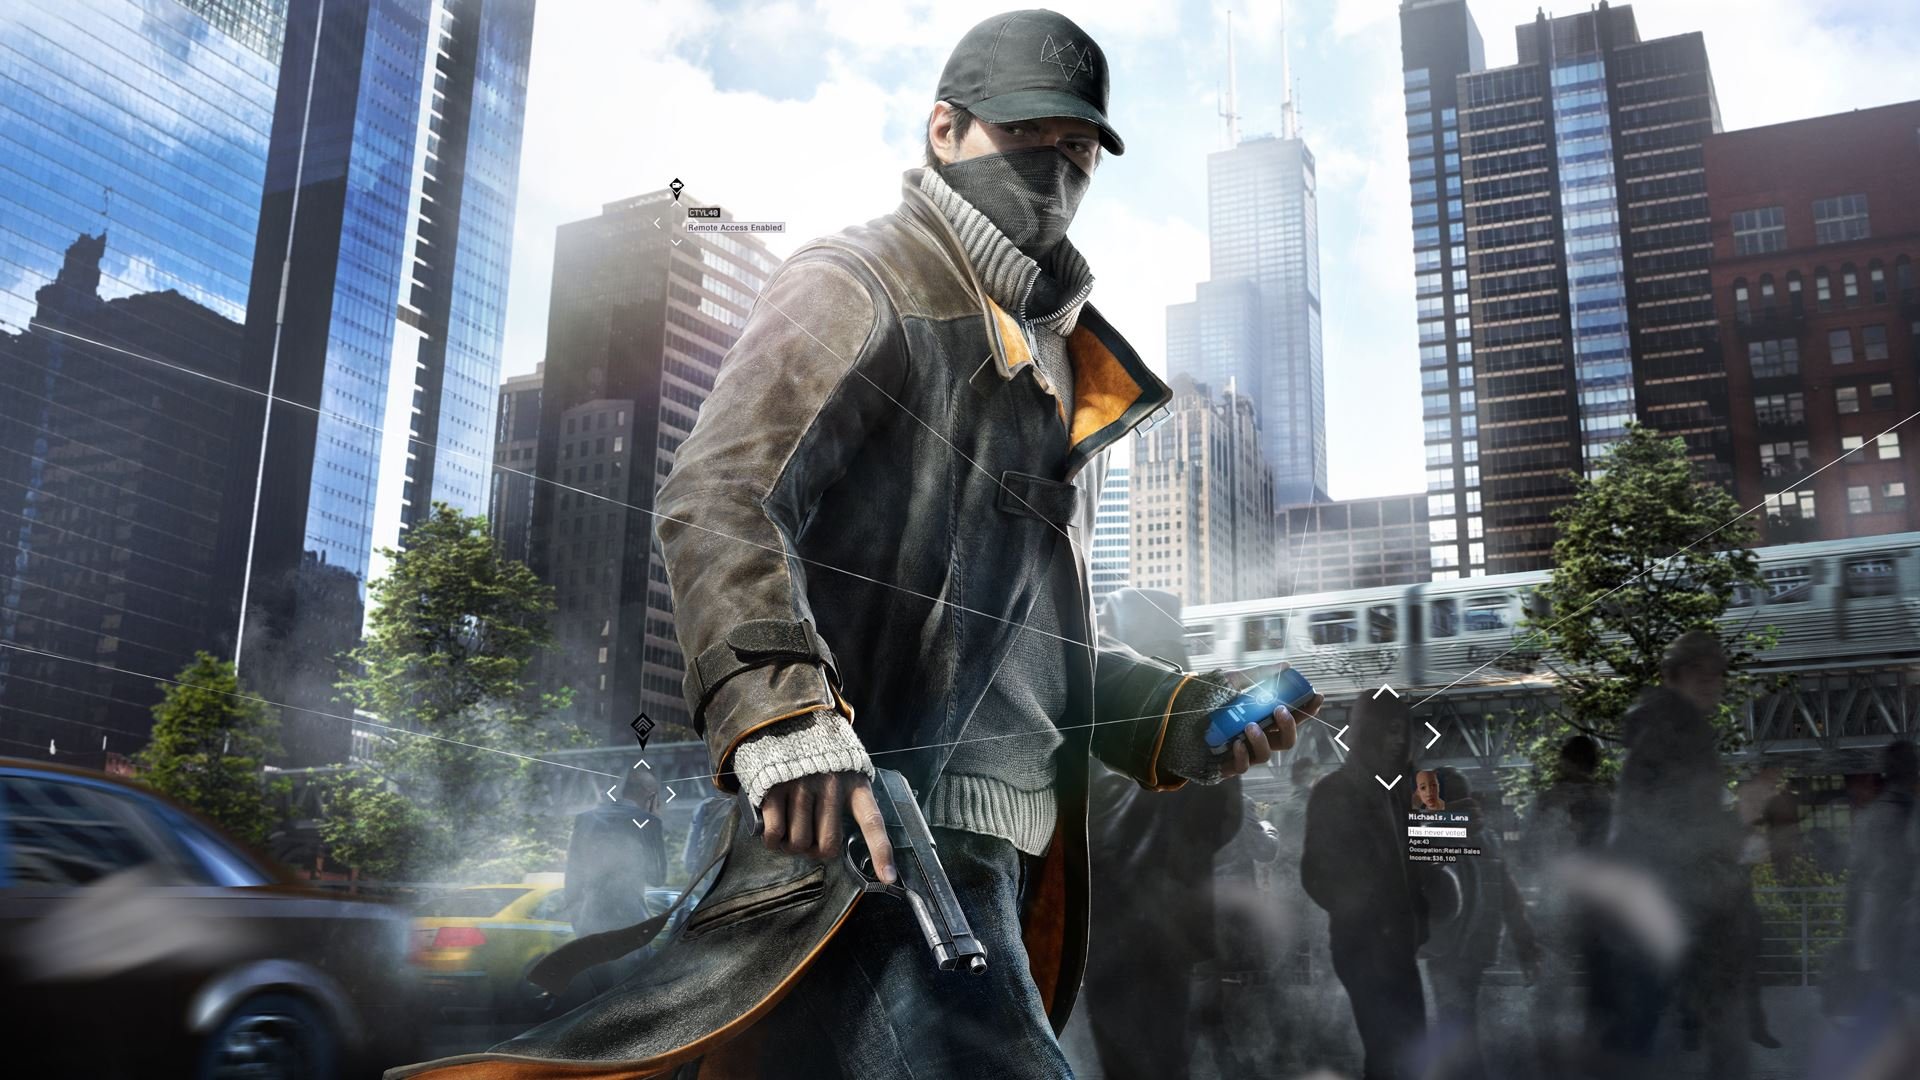 watch dogs, aiden pearce, video game Full HD